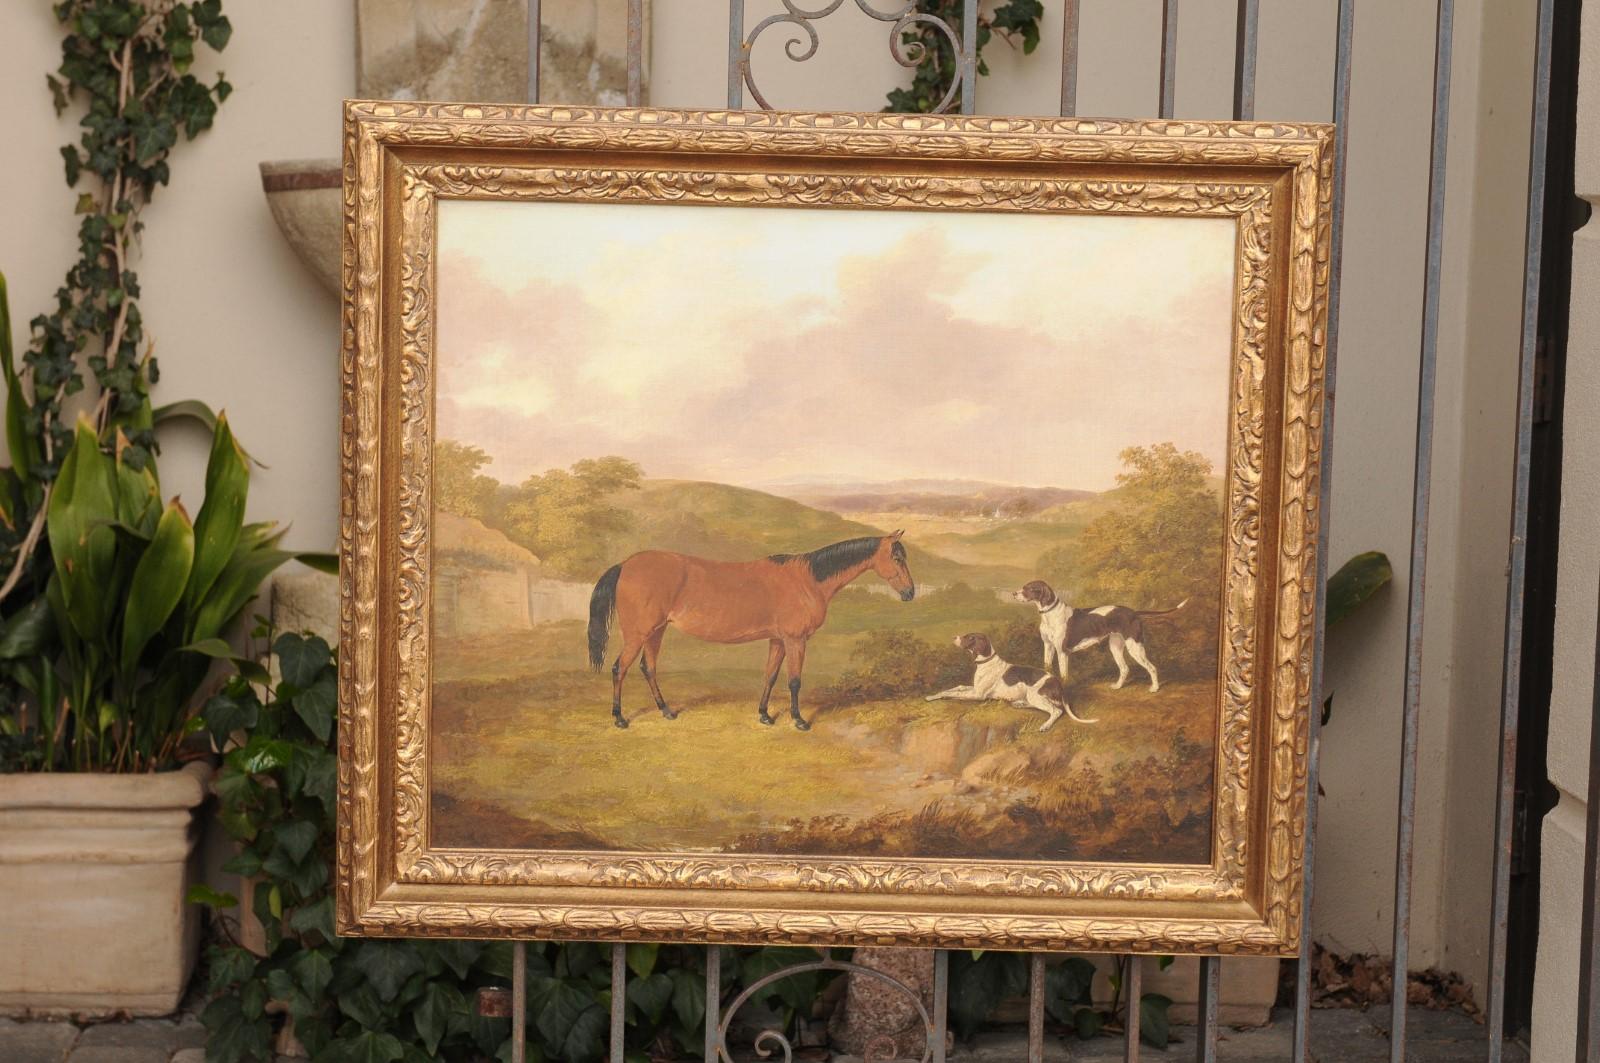 An English Victorian era oil on canvas painting from the mid-19th century, by Thomas Bretland (1802-1874), depicting a horse and two dogs, set in a giltwood frame. Created by naïve painter Thomas W. Bretland in 1852, this oil on canvas painting